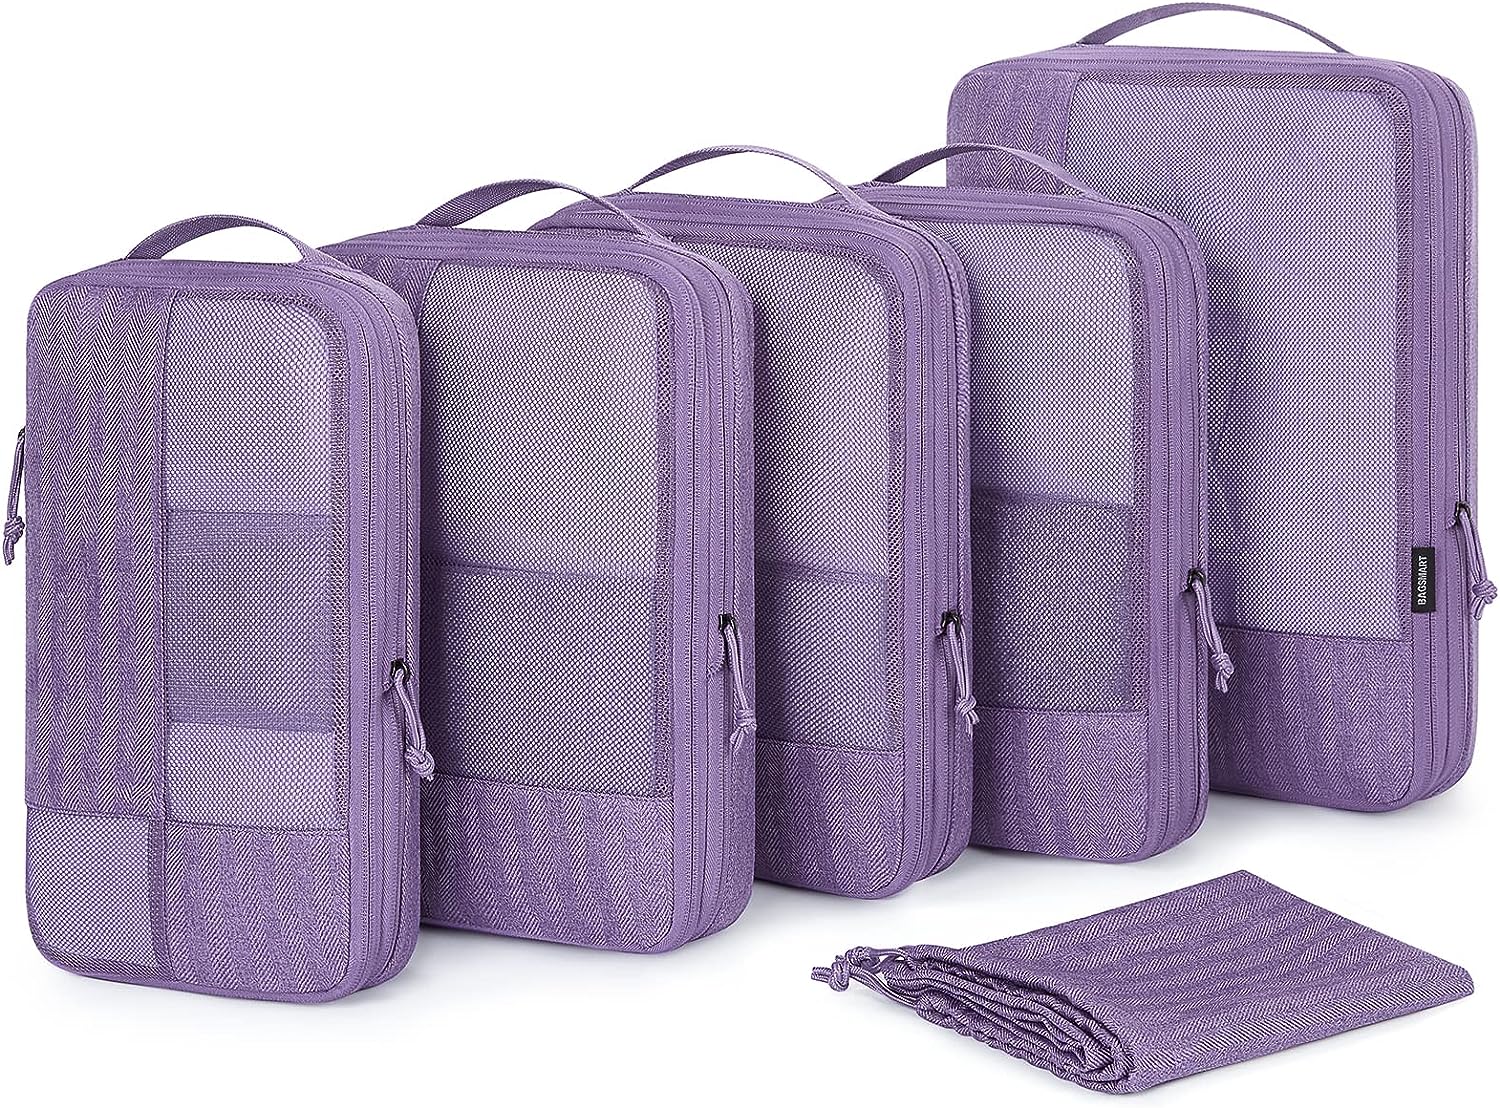 Blushbees® 6-Piece Compression Packing Cubes - Purple with Shoe Bag